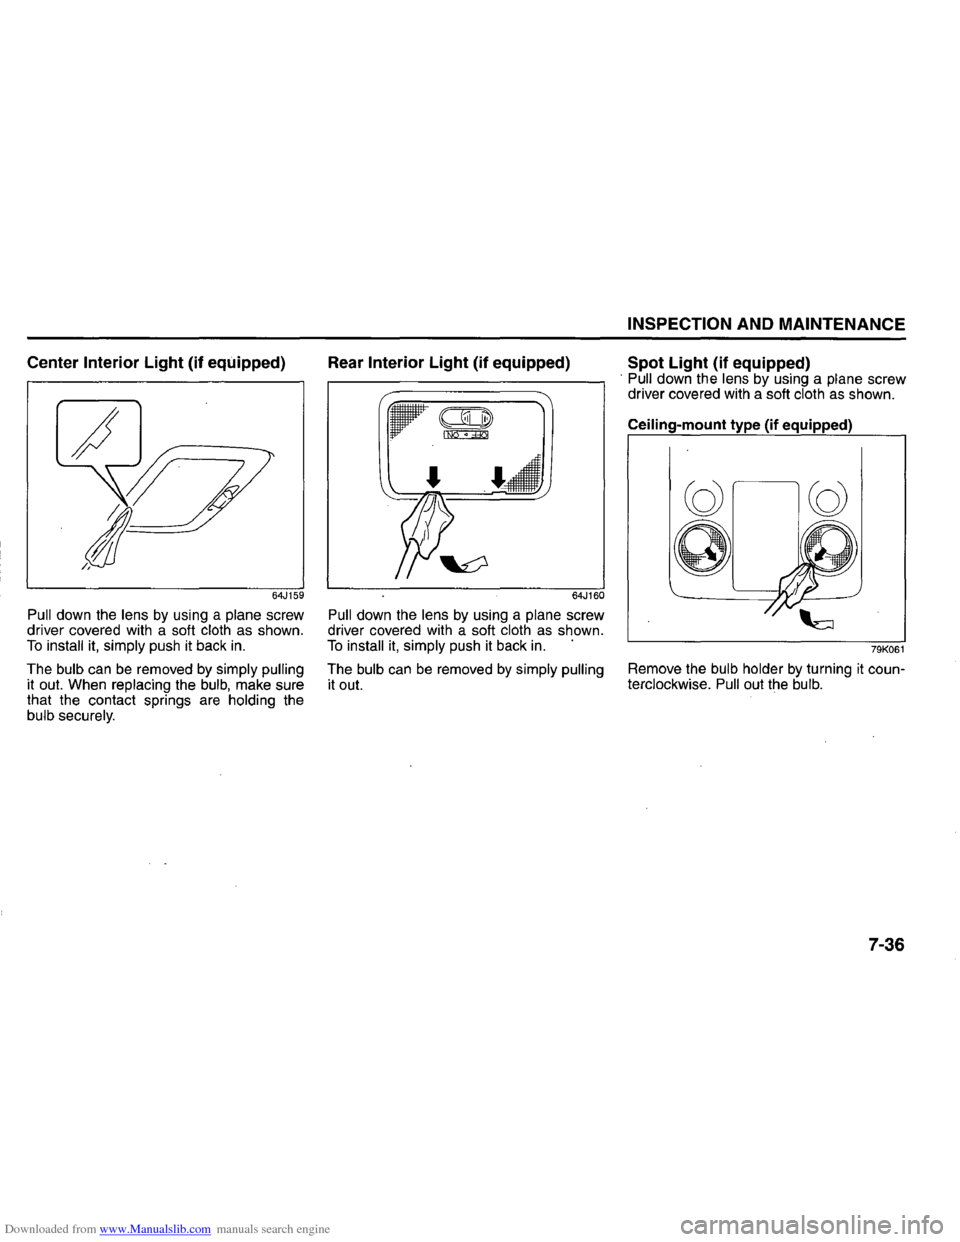 SUZUKI GRAND VITARA 2008 3.G Inspection And Maintenance Manual Downloaded from www.Manualslib.com manuals search engine Center Interior Light (if equipped) 
64J159 
Pull down  the lens by using  a plane screw 
driver  covered  with a soft cloth as  shown. To inst